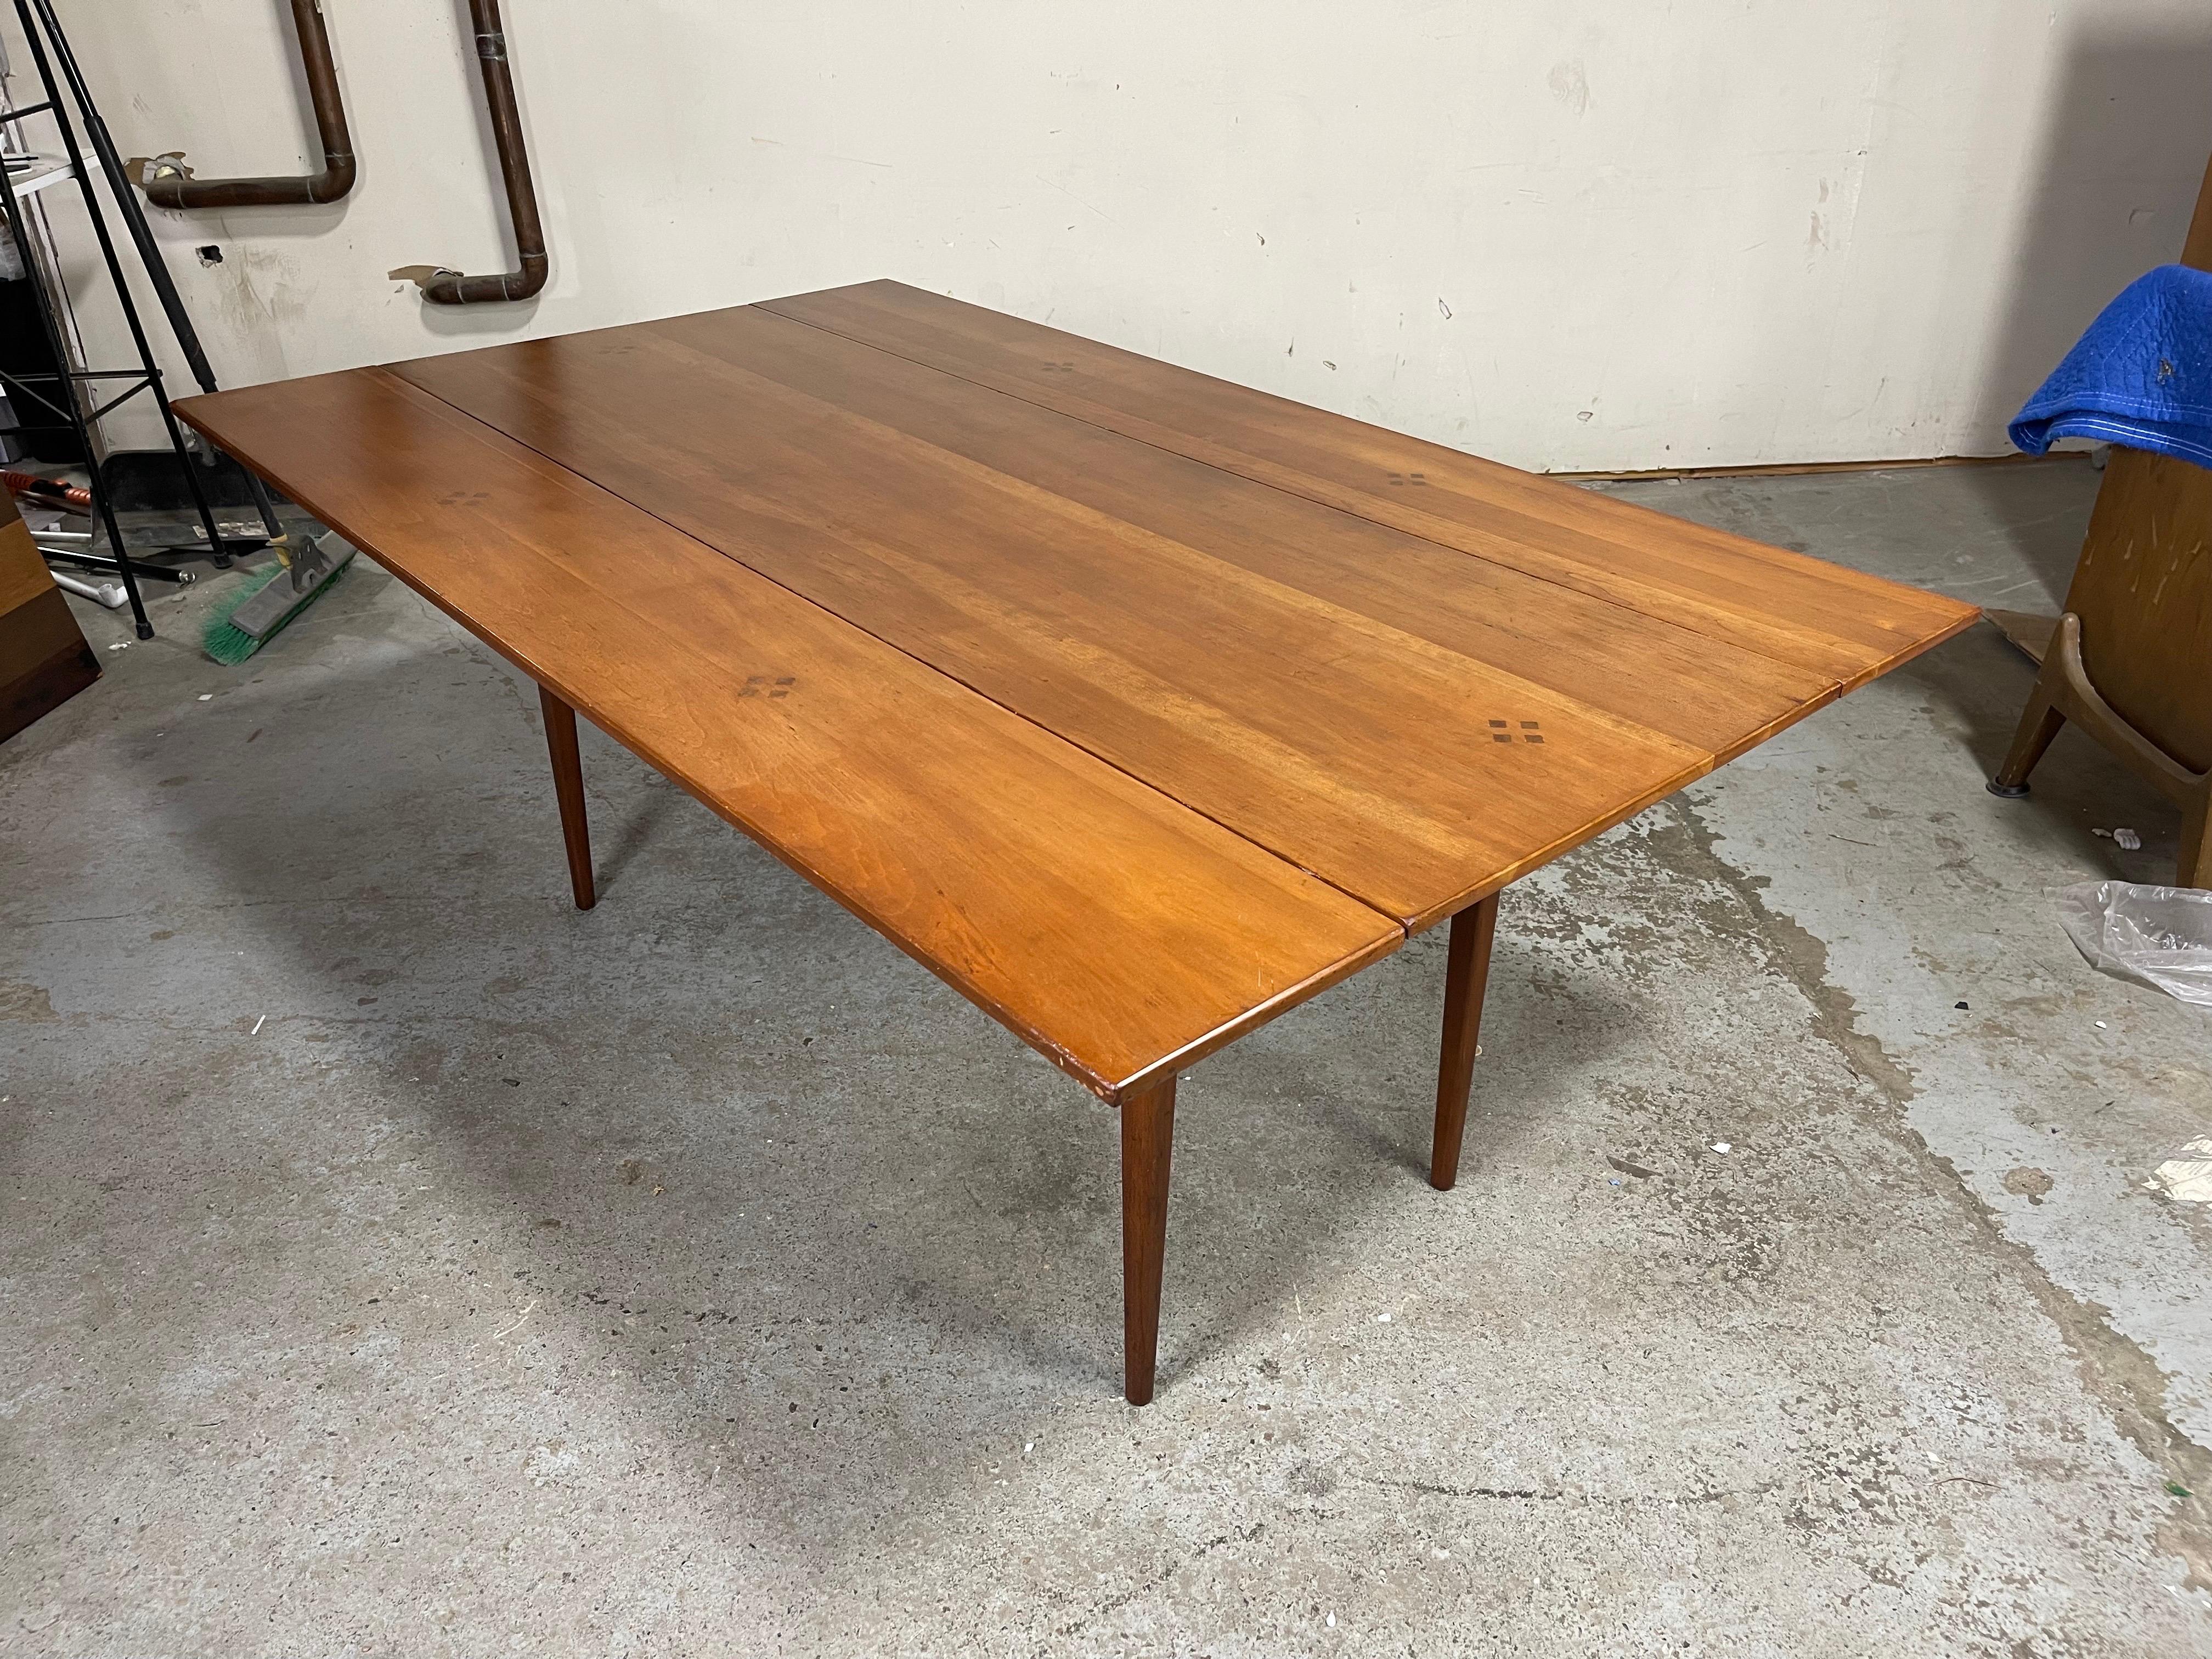 Excellent drop leaves table in a farmhouse rectangle style with rosewood inlay by Kipp Stewart. Original condition. Beautiful hard wood pull out supports with brass pulls on each side. Some wear. Please see photos and videos. 
Measures 70 x 42.5 x